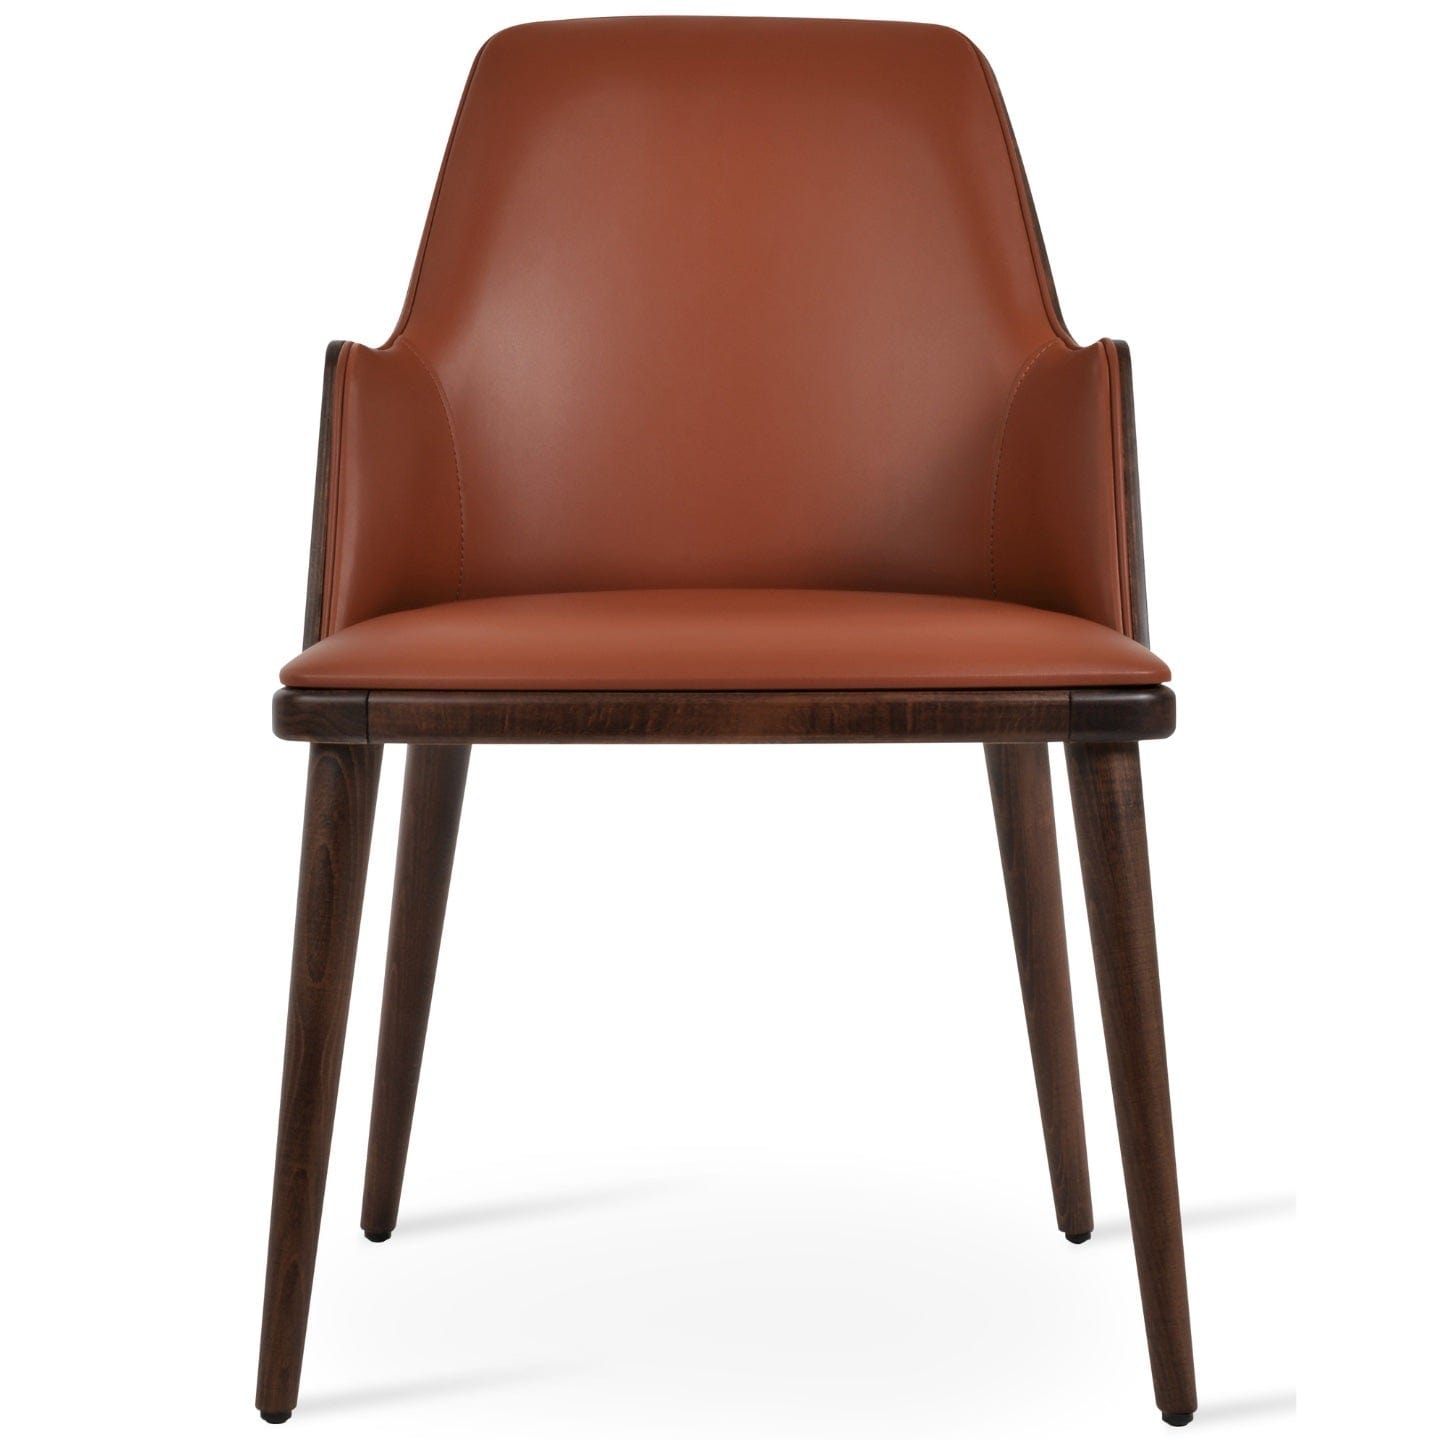 sohoConcept Kitchen & Dining Room Chairs RomanoW Wood Dining ArmChair | Brown Leather Parsons Chair